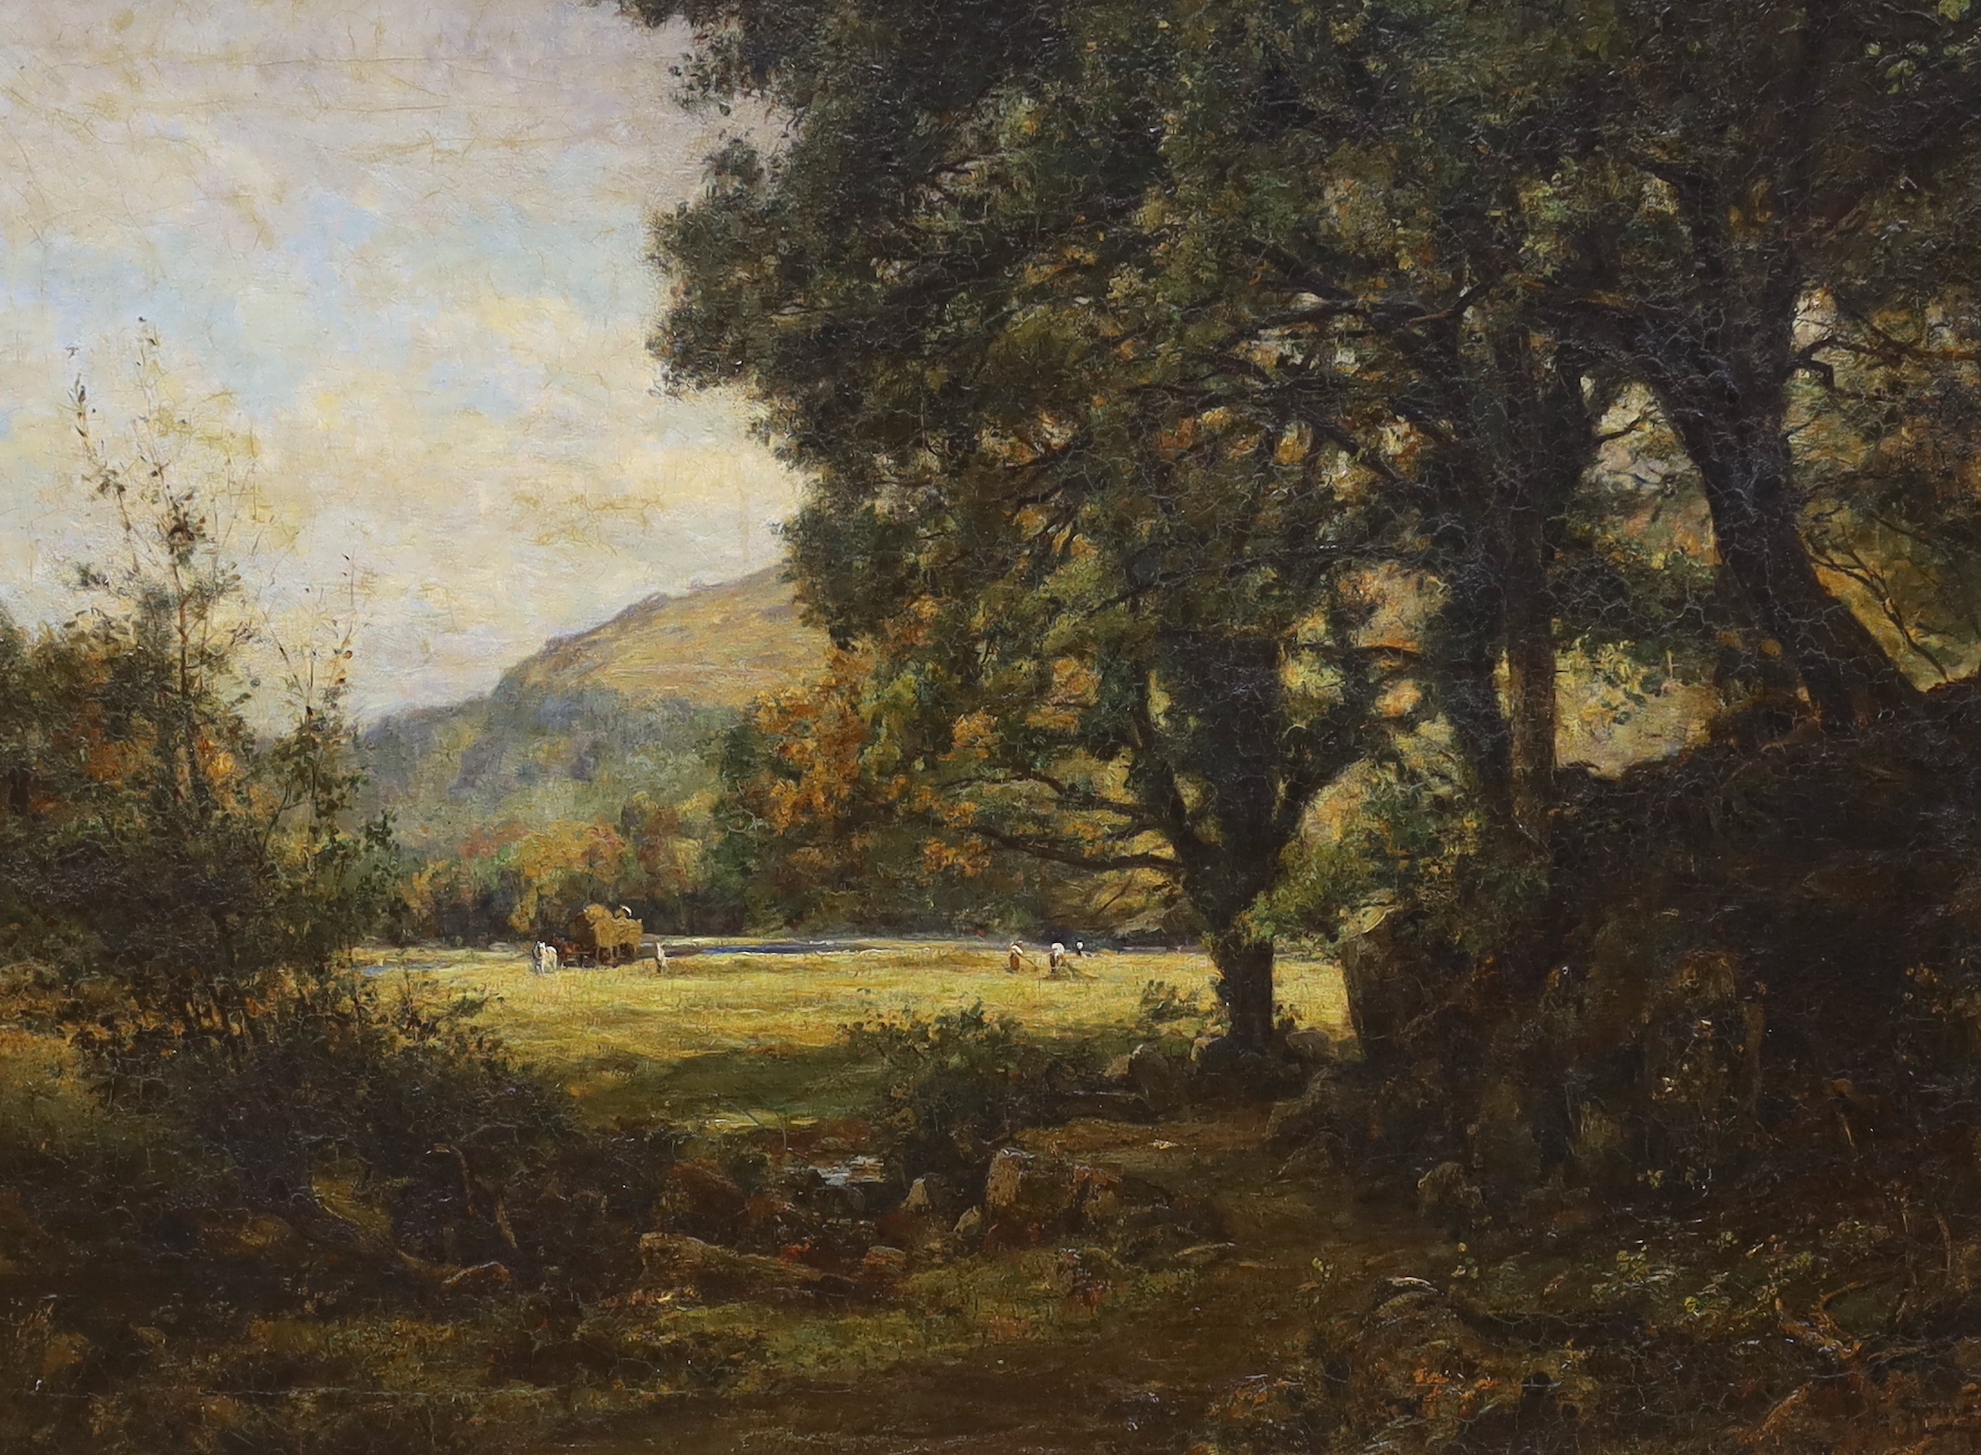 Oil on canvas, Woodland before a clearing with figures hay making, indistinctly signed, possibly K G So...?, 73 x 98cm